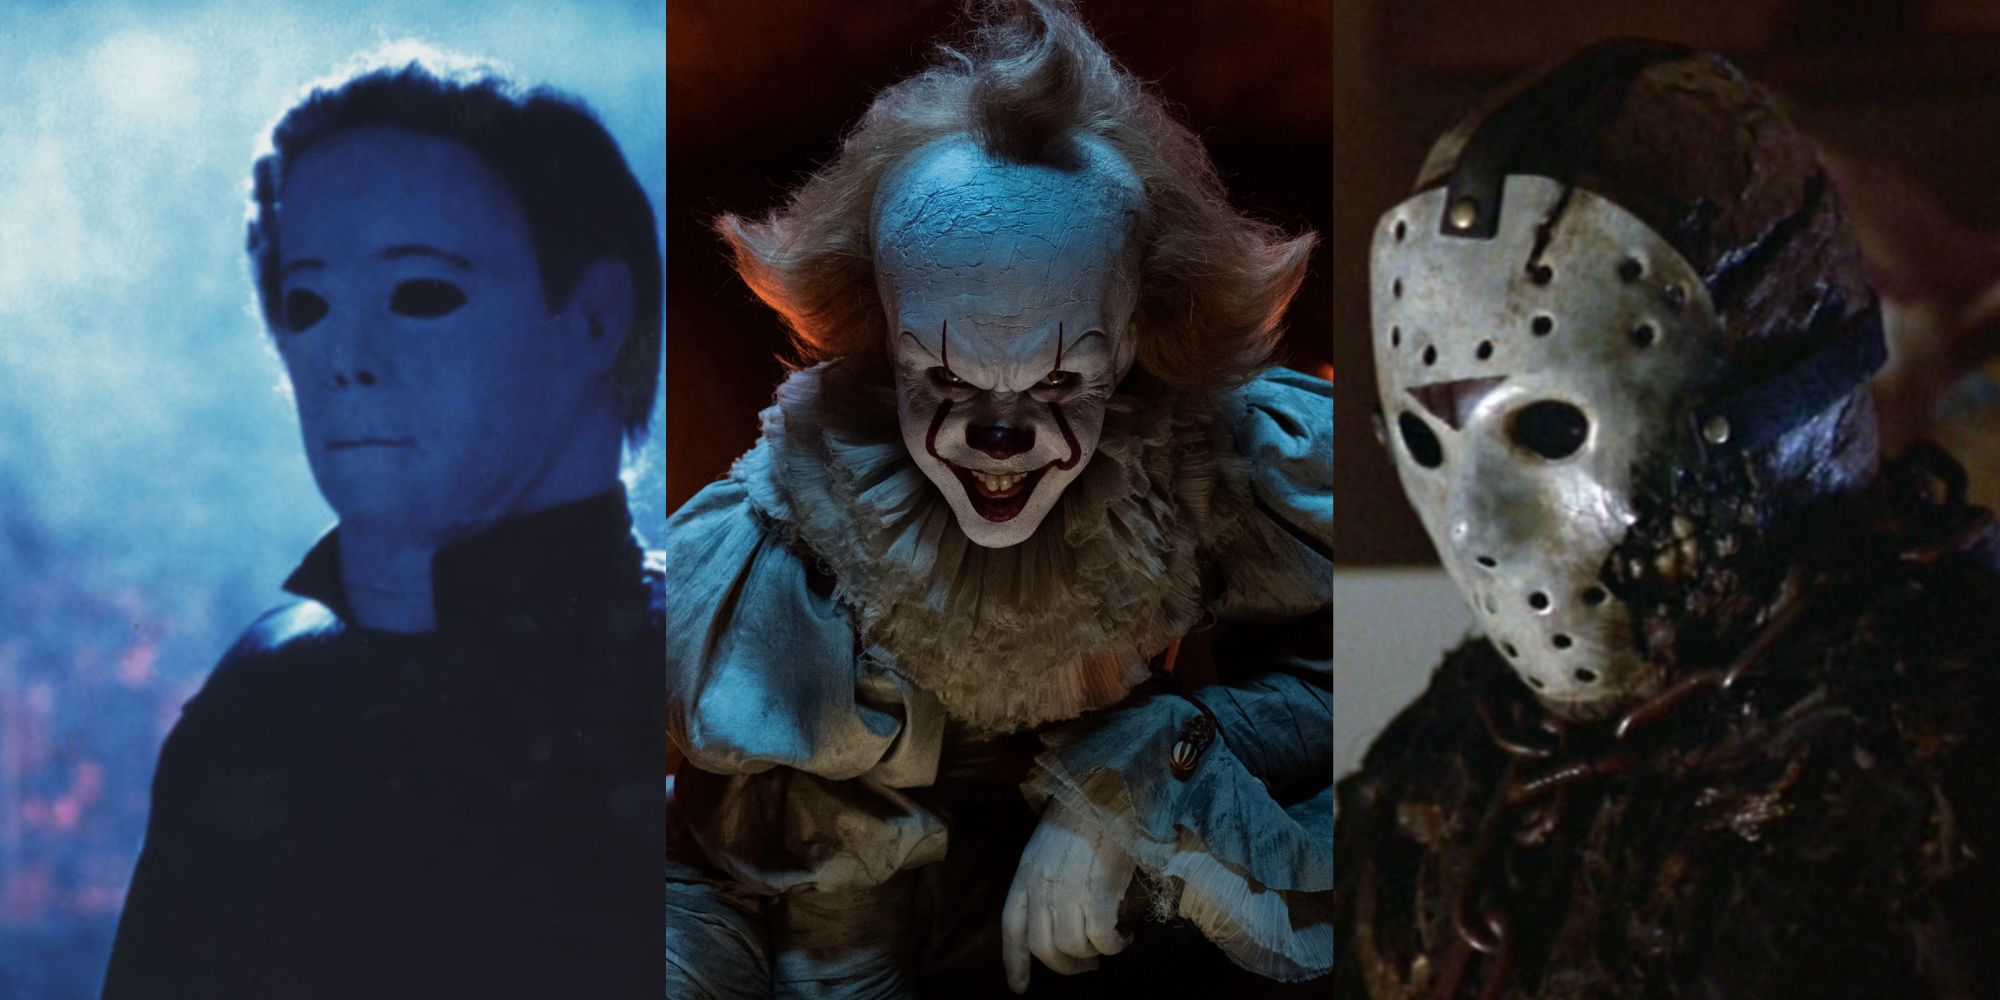 Jason Voorhees, Pennywise, and Michael Myers